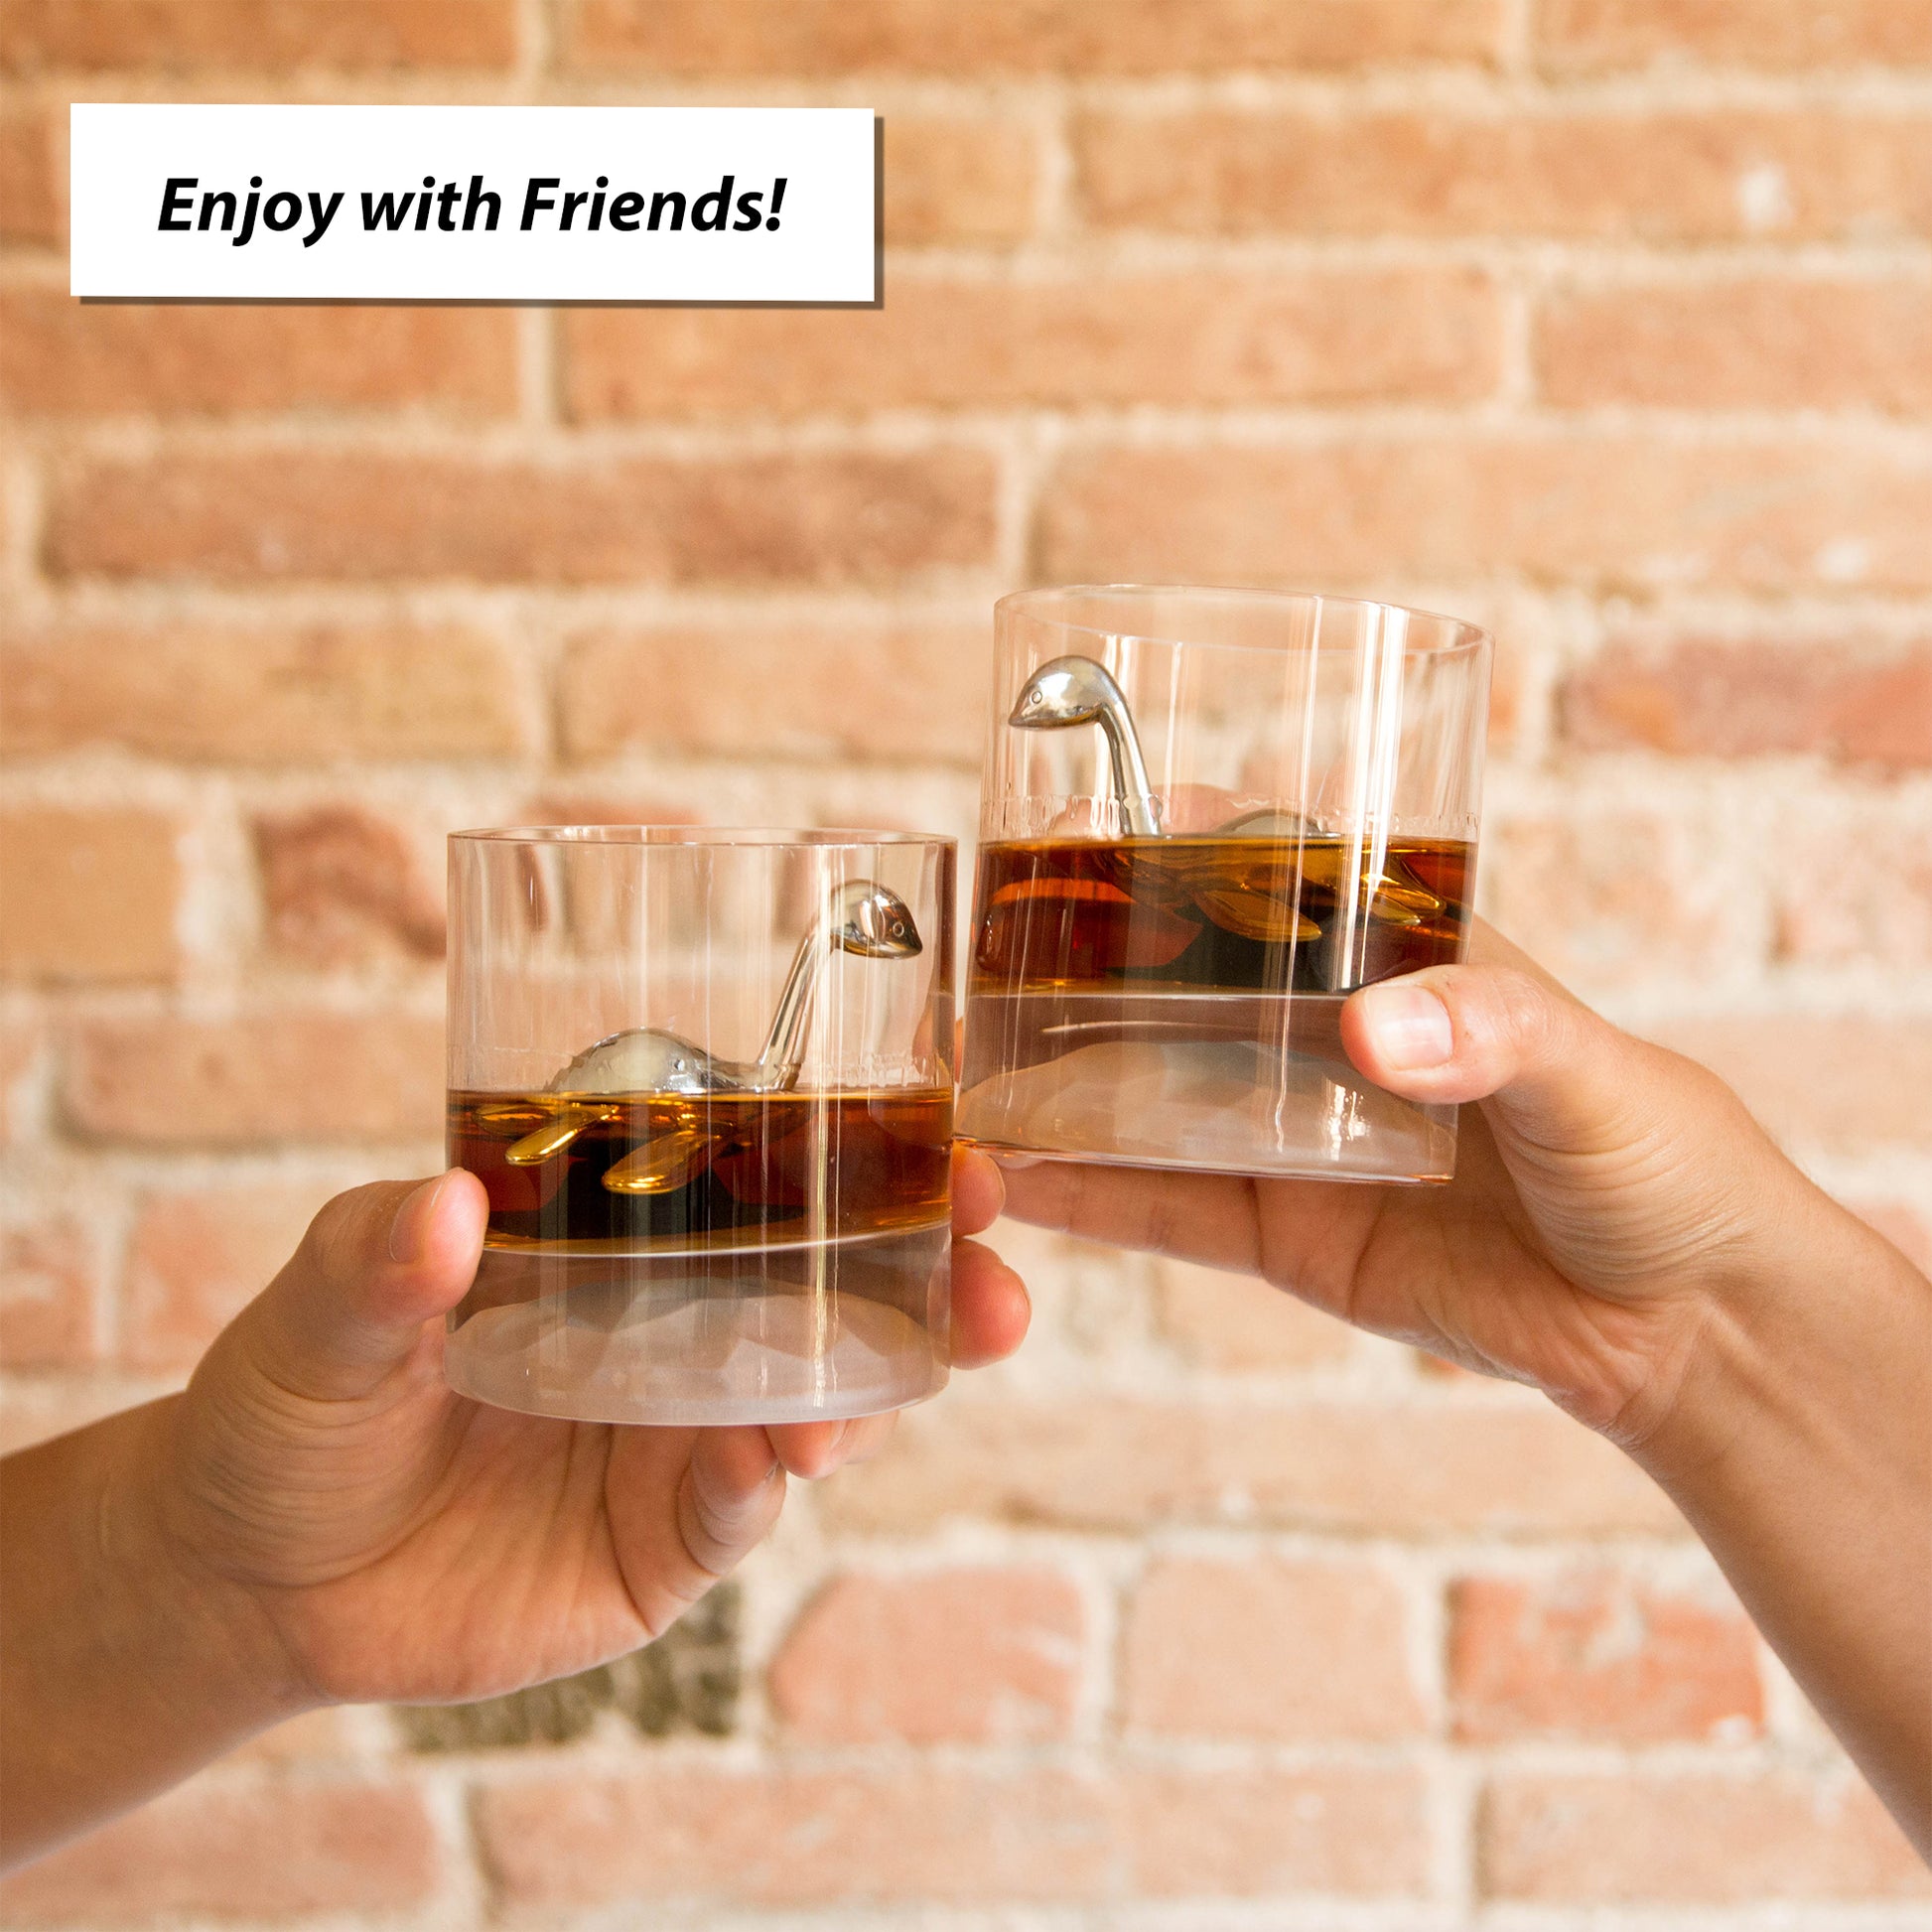 Scotch Ness Critter Whisky Stone is Great with Friends, Enjoy as a Set